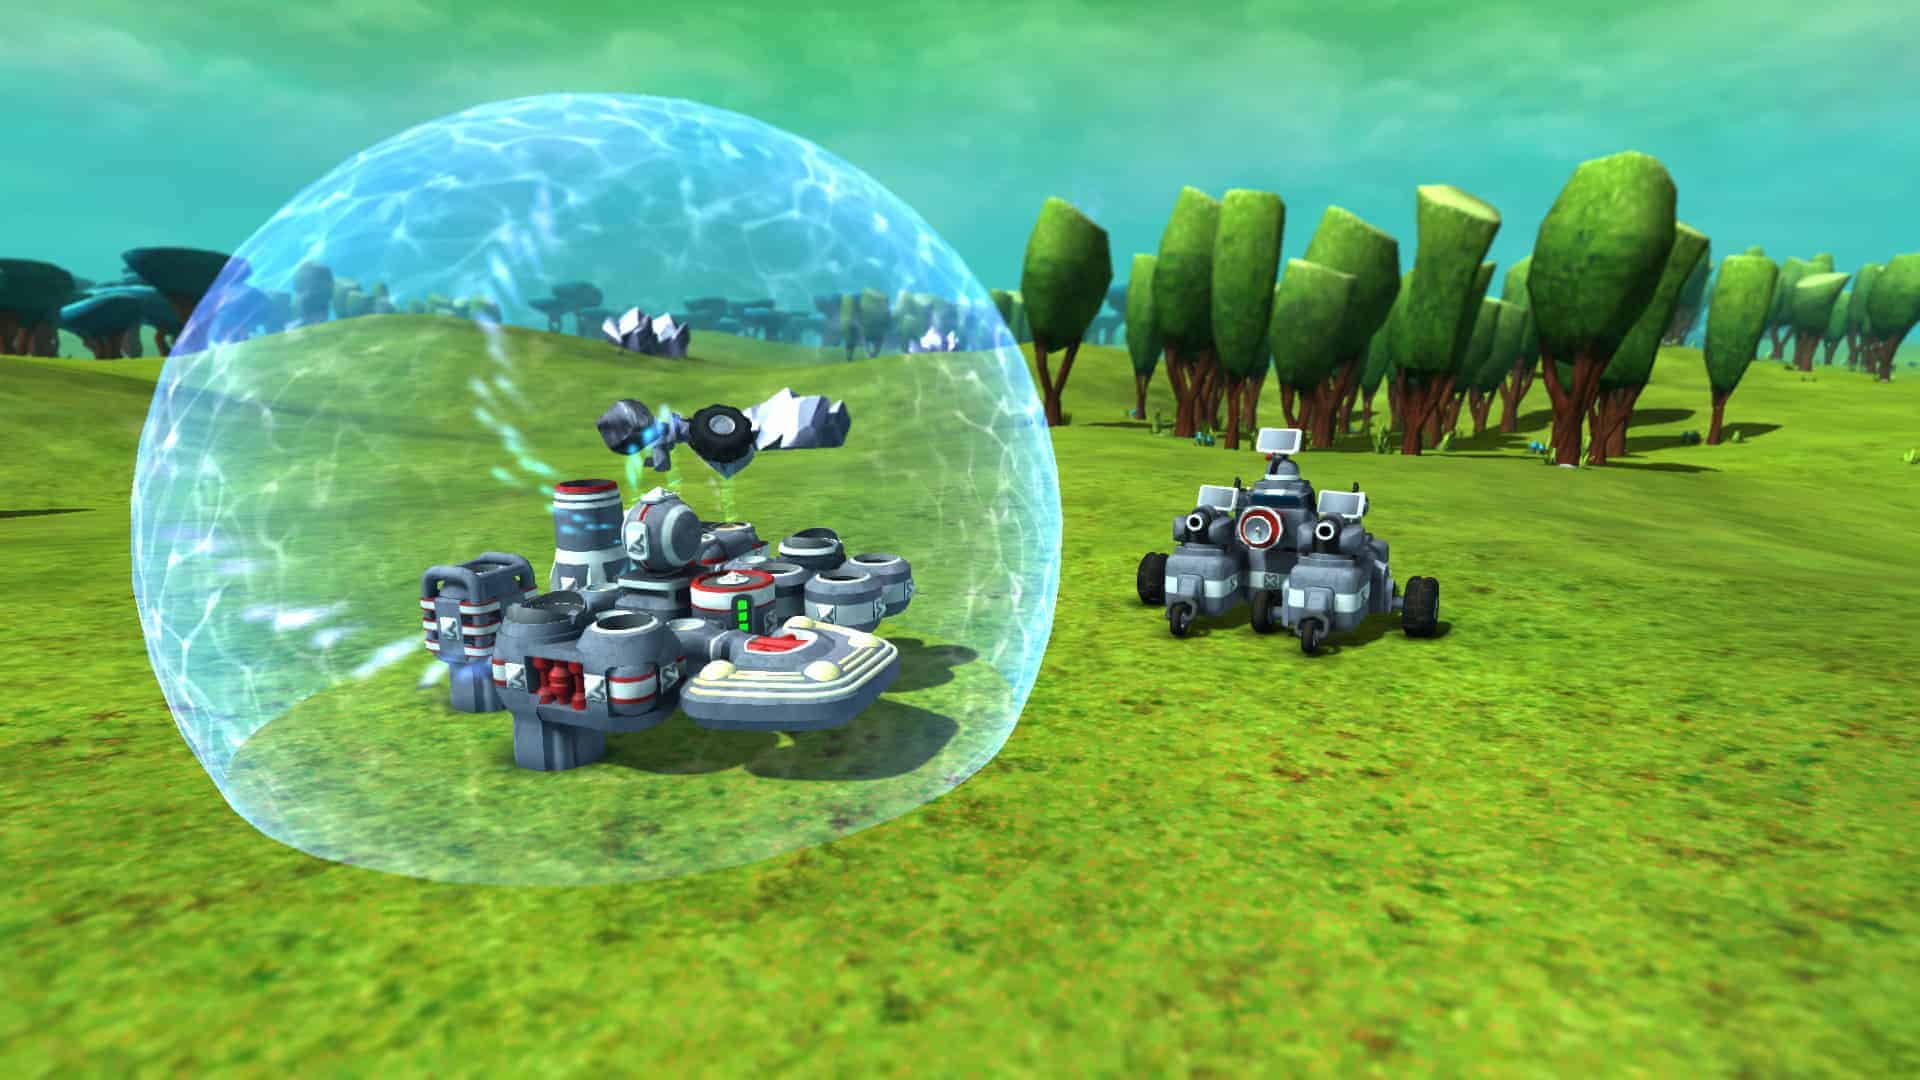 terratech game free download